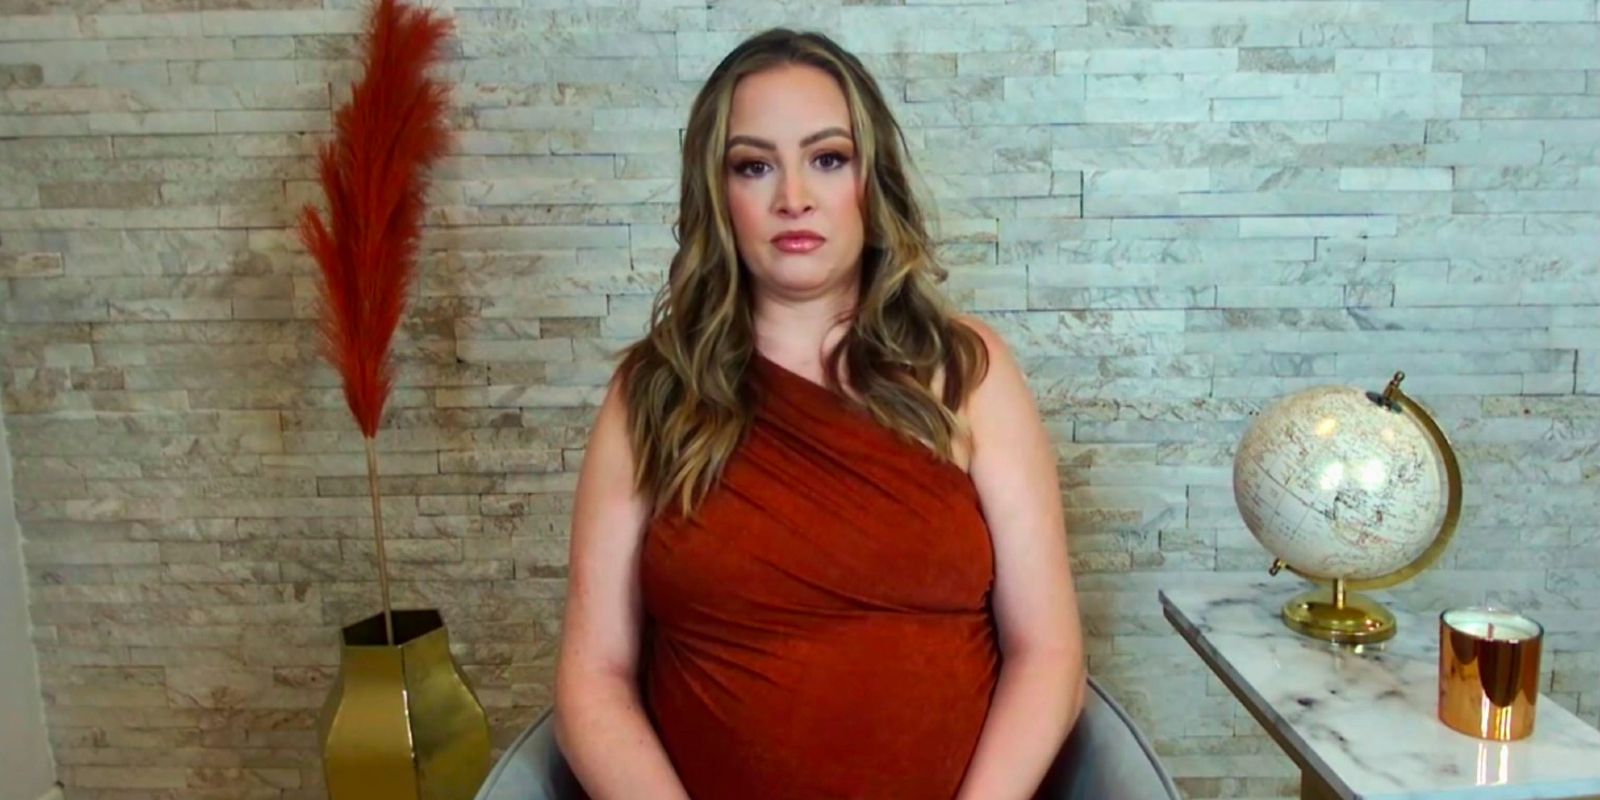 Libby Potthast at the 90 Day Fiancé: Happily Ever After season 7 Tell All